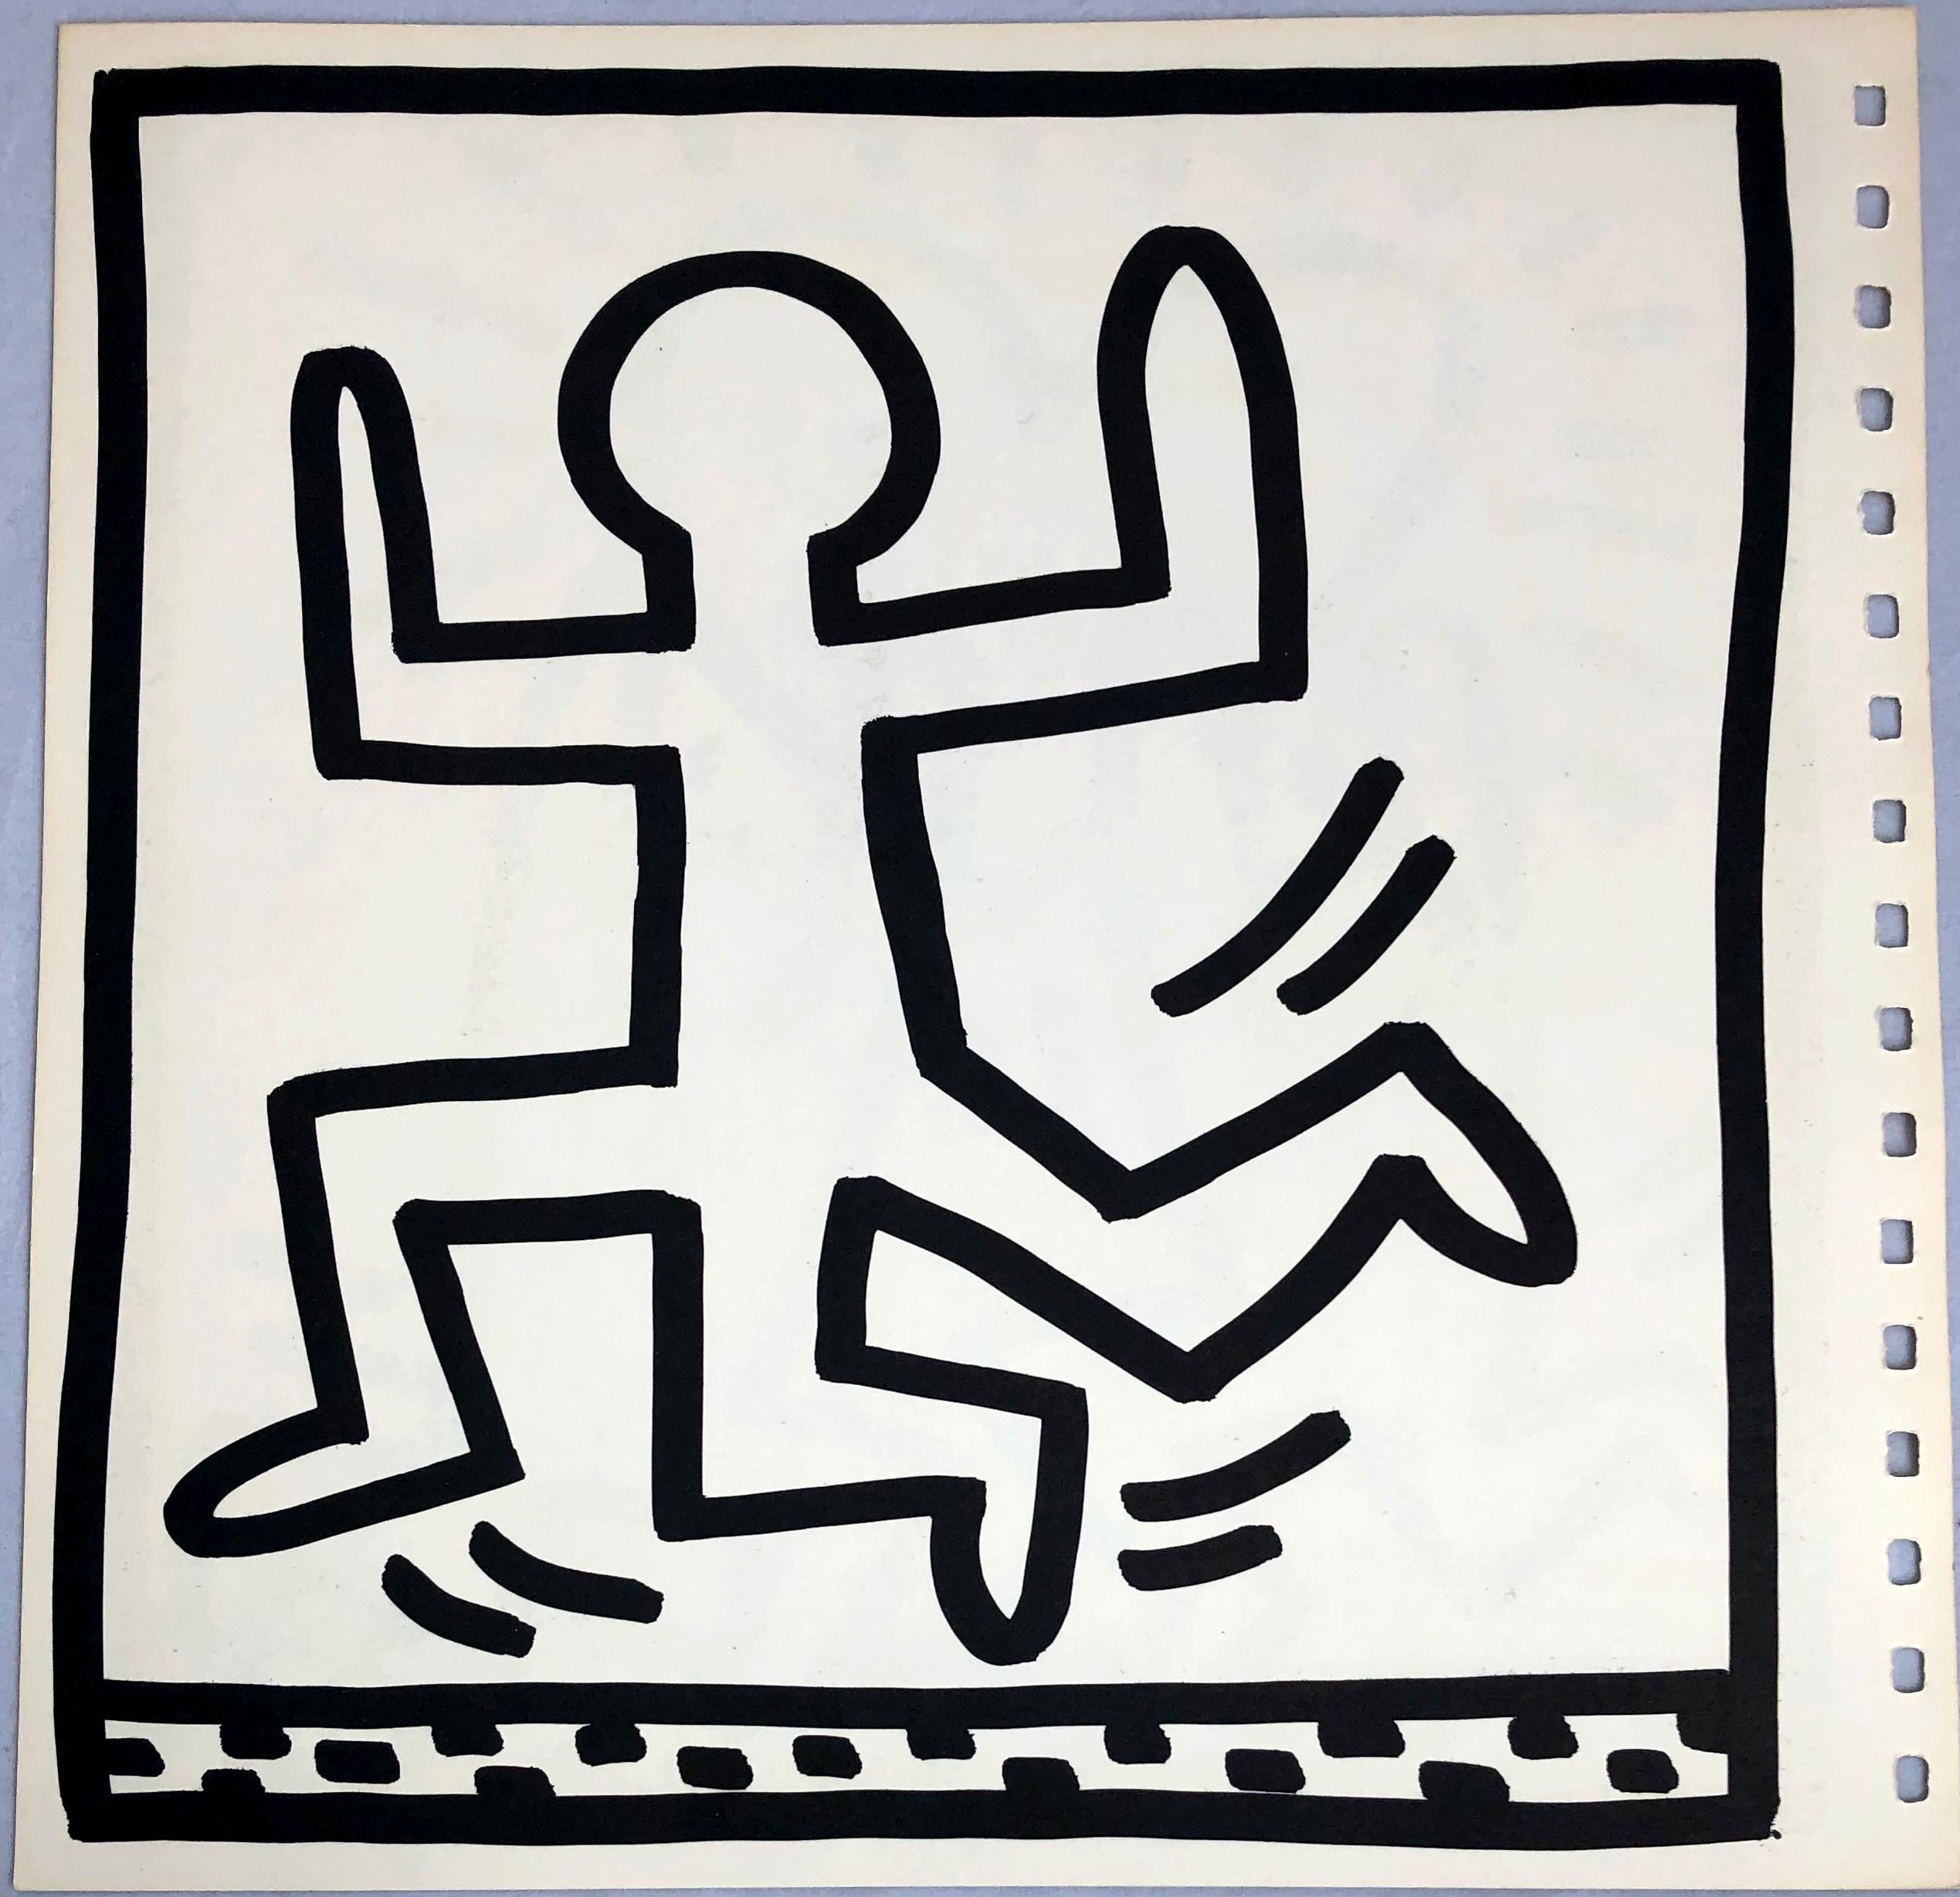 Keith Haring (untitled) Heart Lithograph 1982:
Double-sided lithographic insert from the seminal spiral bound, early 1980s Shafrazi monograph showcasing Haring's work. 

Offset lithograph; 9 x 9 inches. 
Condition: good overall vintage condition